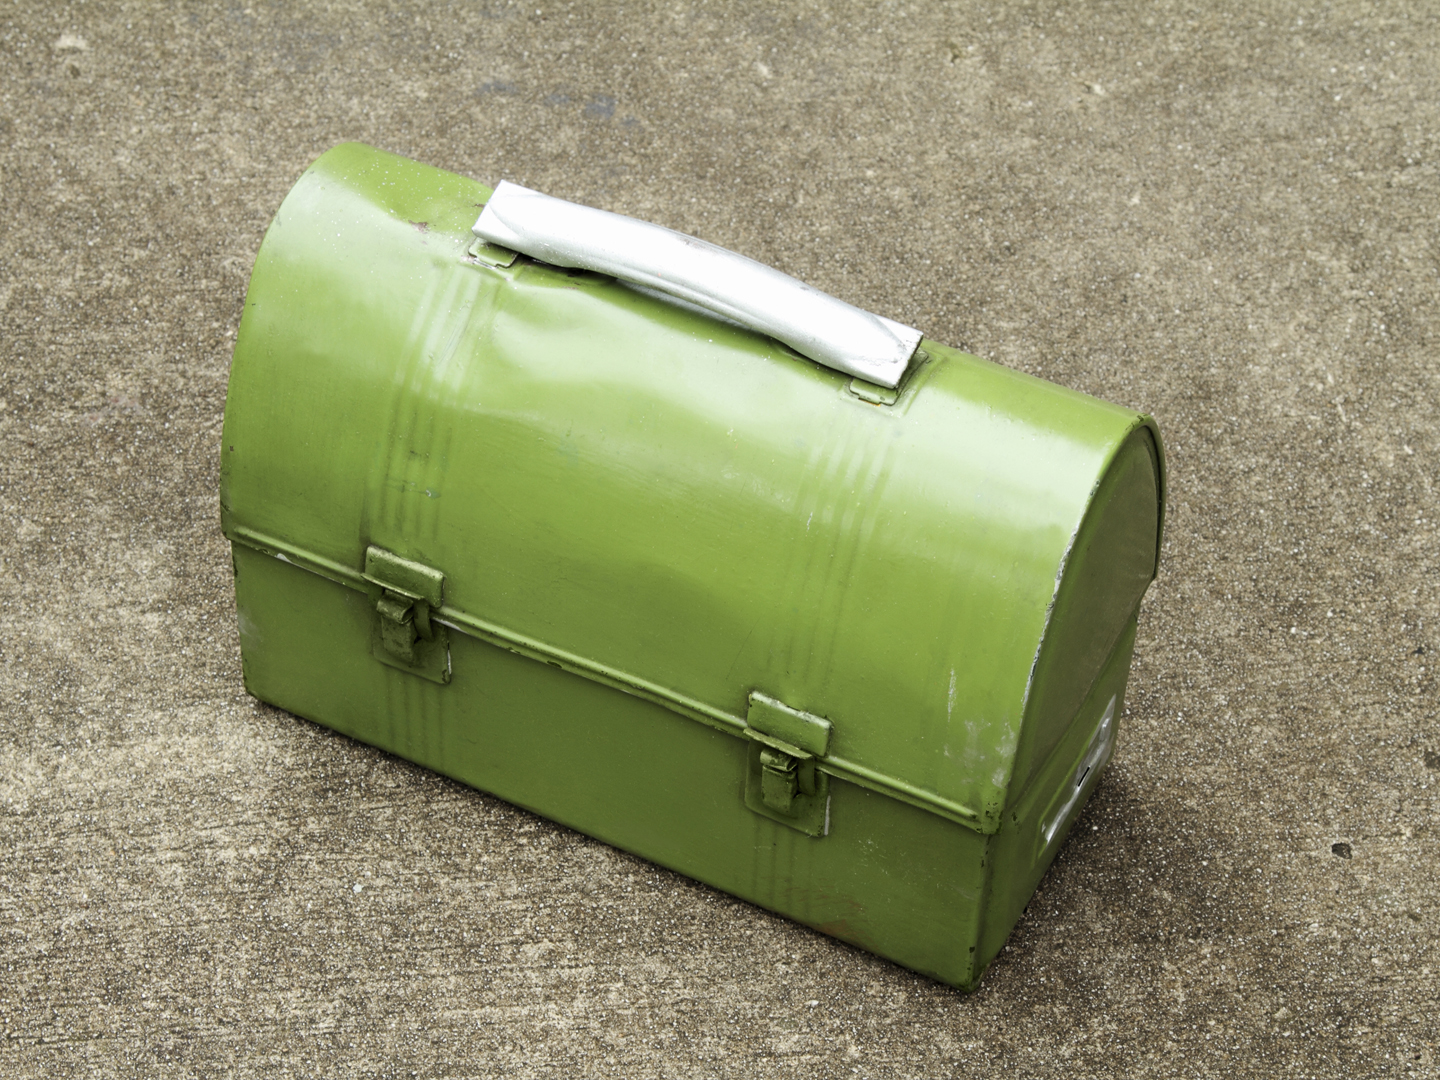 &quot;A green metal lunch box sits on a cement floor. This is an old style work lunch box with some dents, scratches and paint stains.&quot;